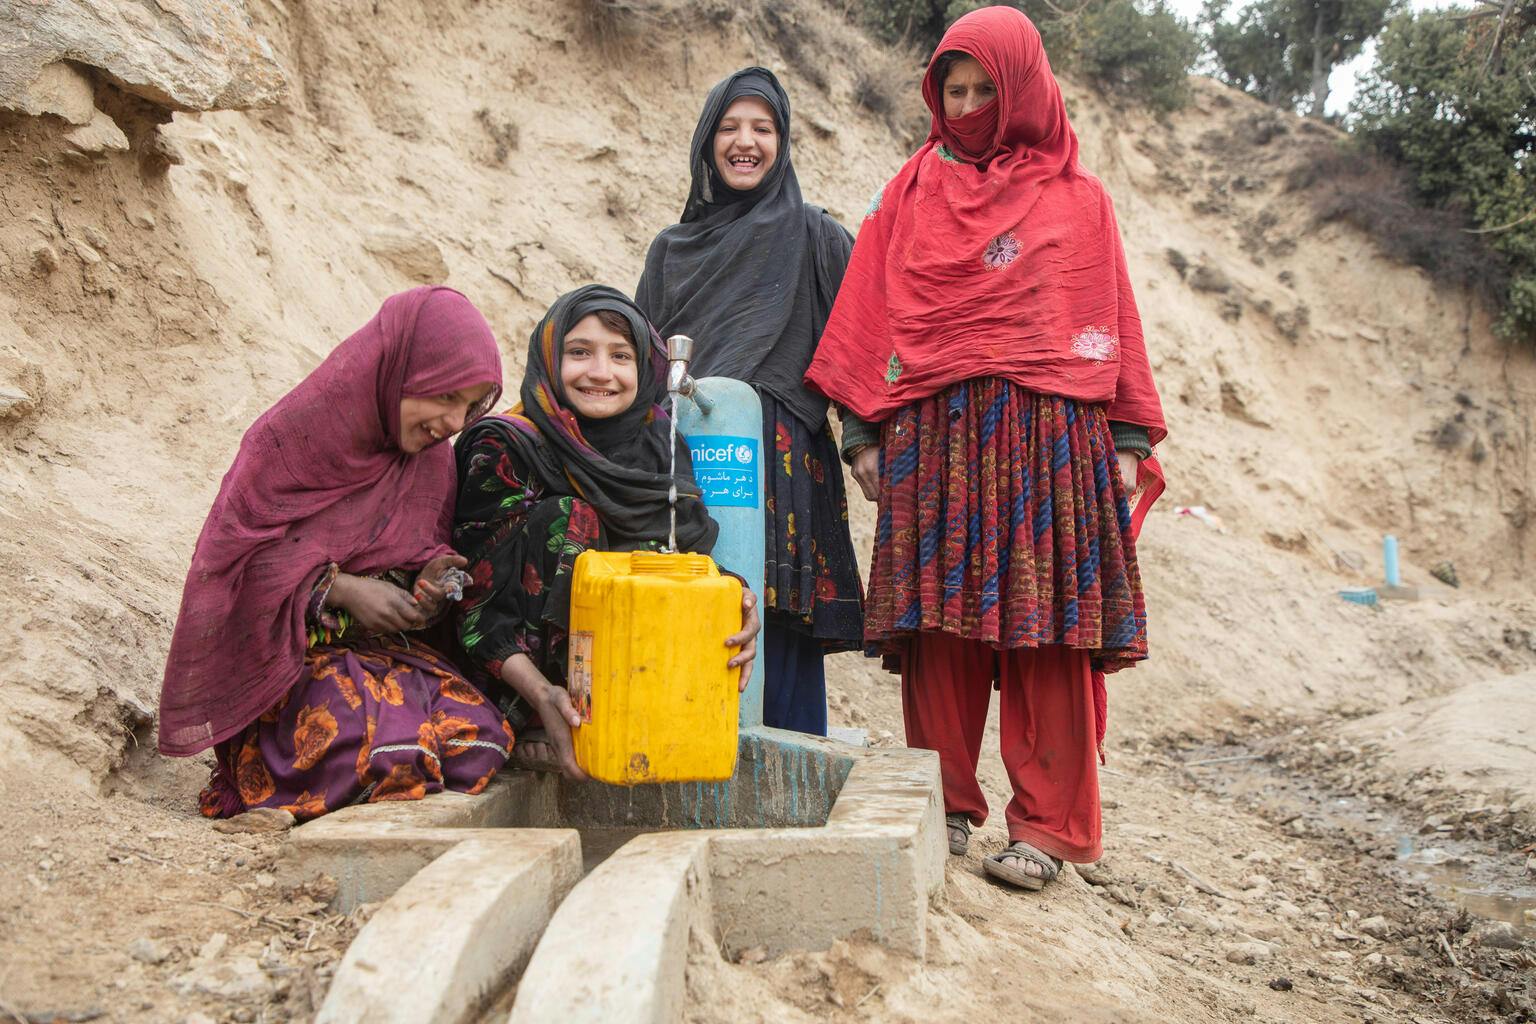 A lifetime of water - Children fill a jerry can from a new water tap in Payok Abad Village in Nuristan province's Kantiwa Valley in Afghanistan